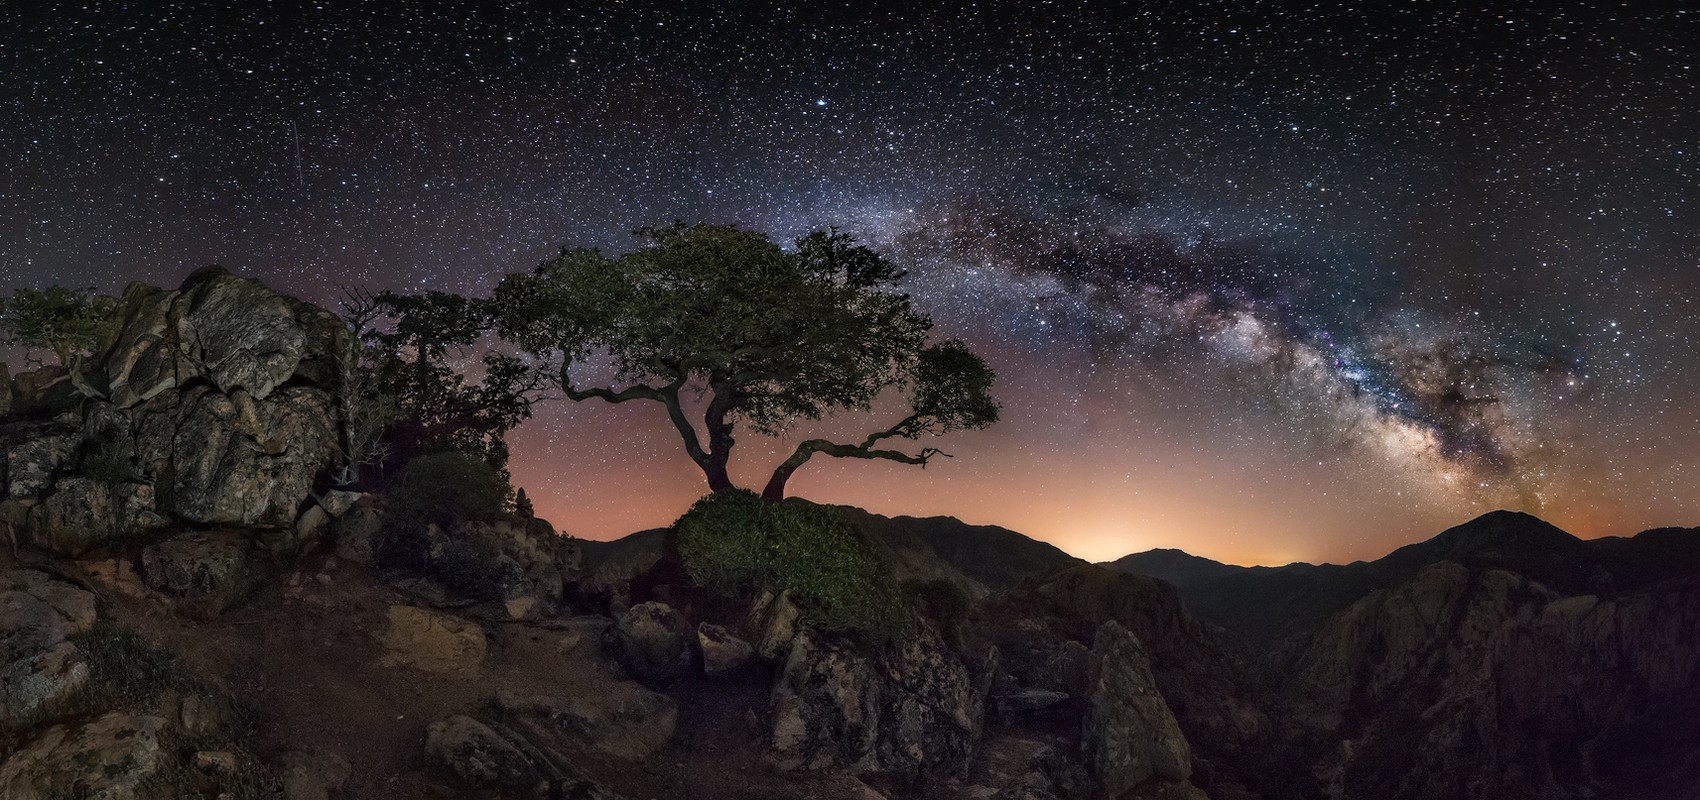 General 1700x800 nature landscape starry night Milky Way trees mountains lights long exposure space rocks stars